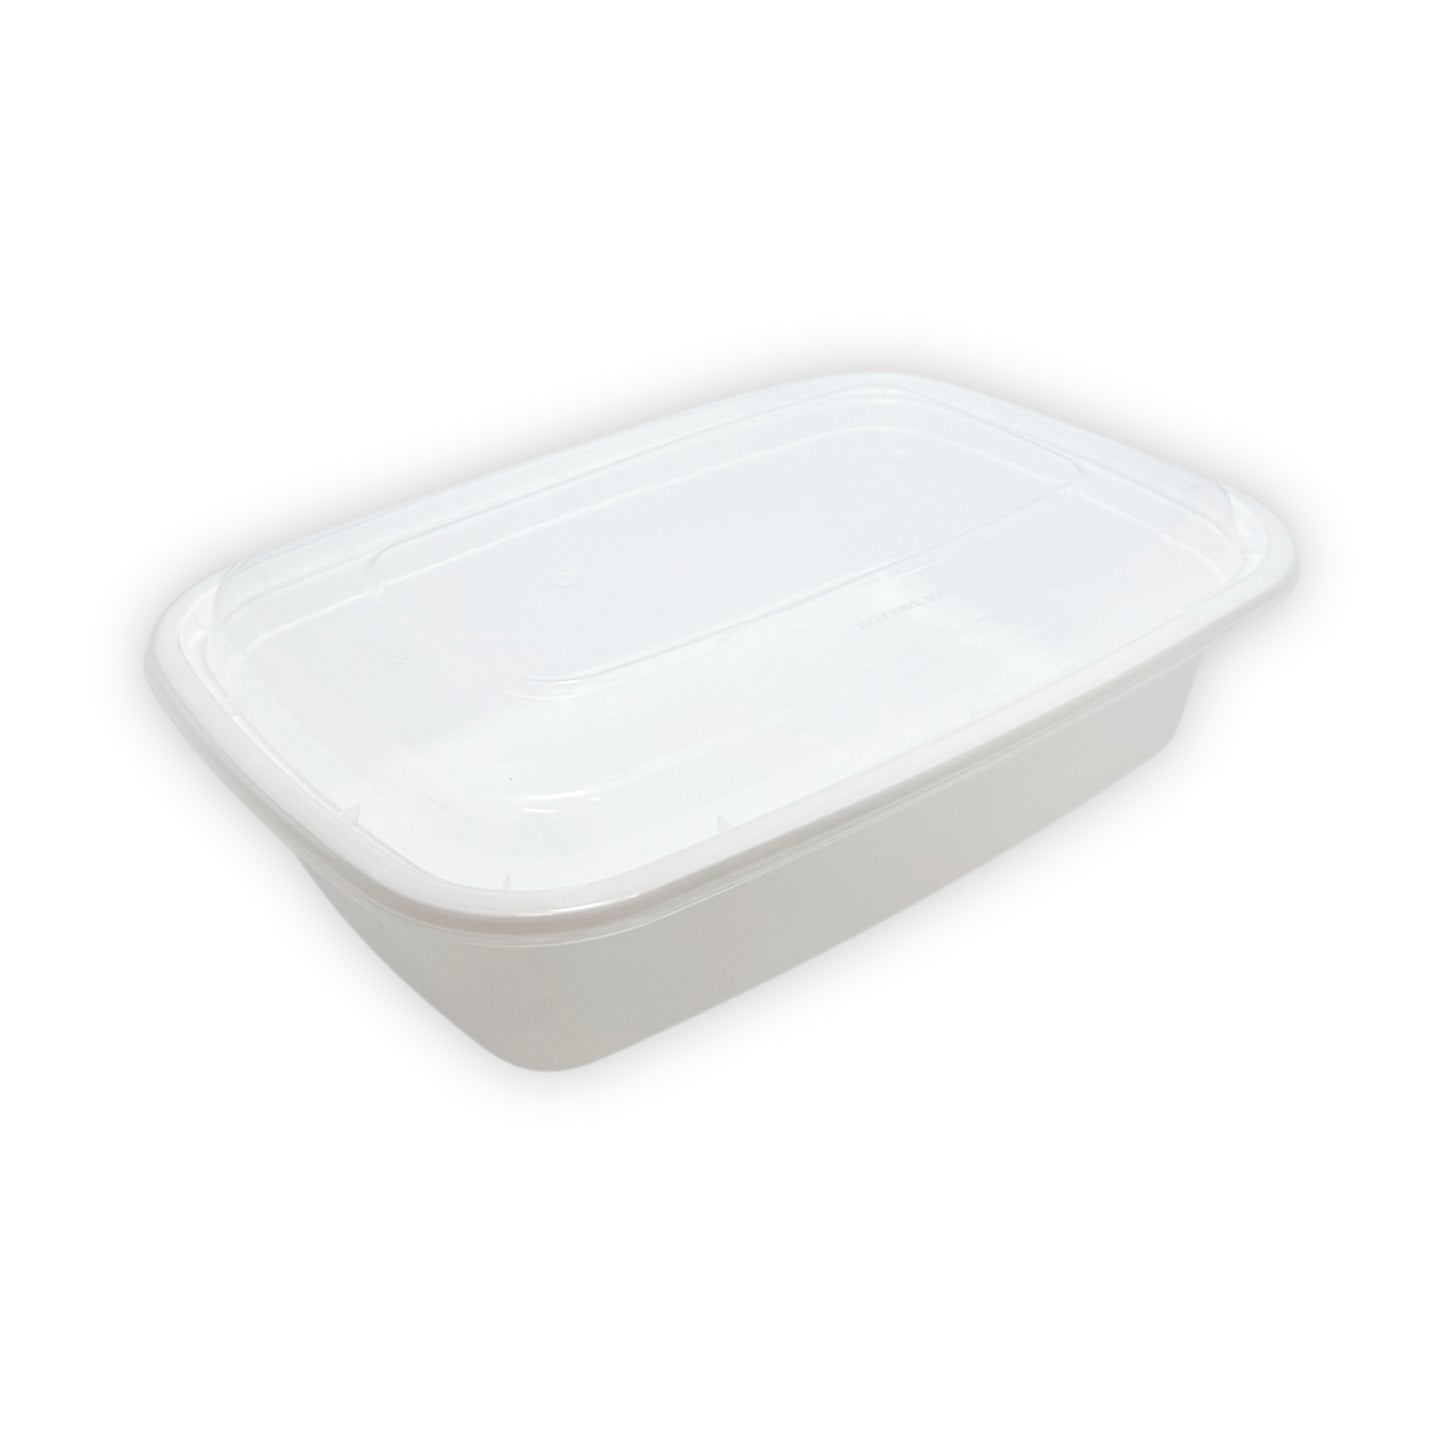 KIS-KY28G | 150sets 28oz, 828ml White PP Rectangle Container with Clear Lids Combo; $0.258/set